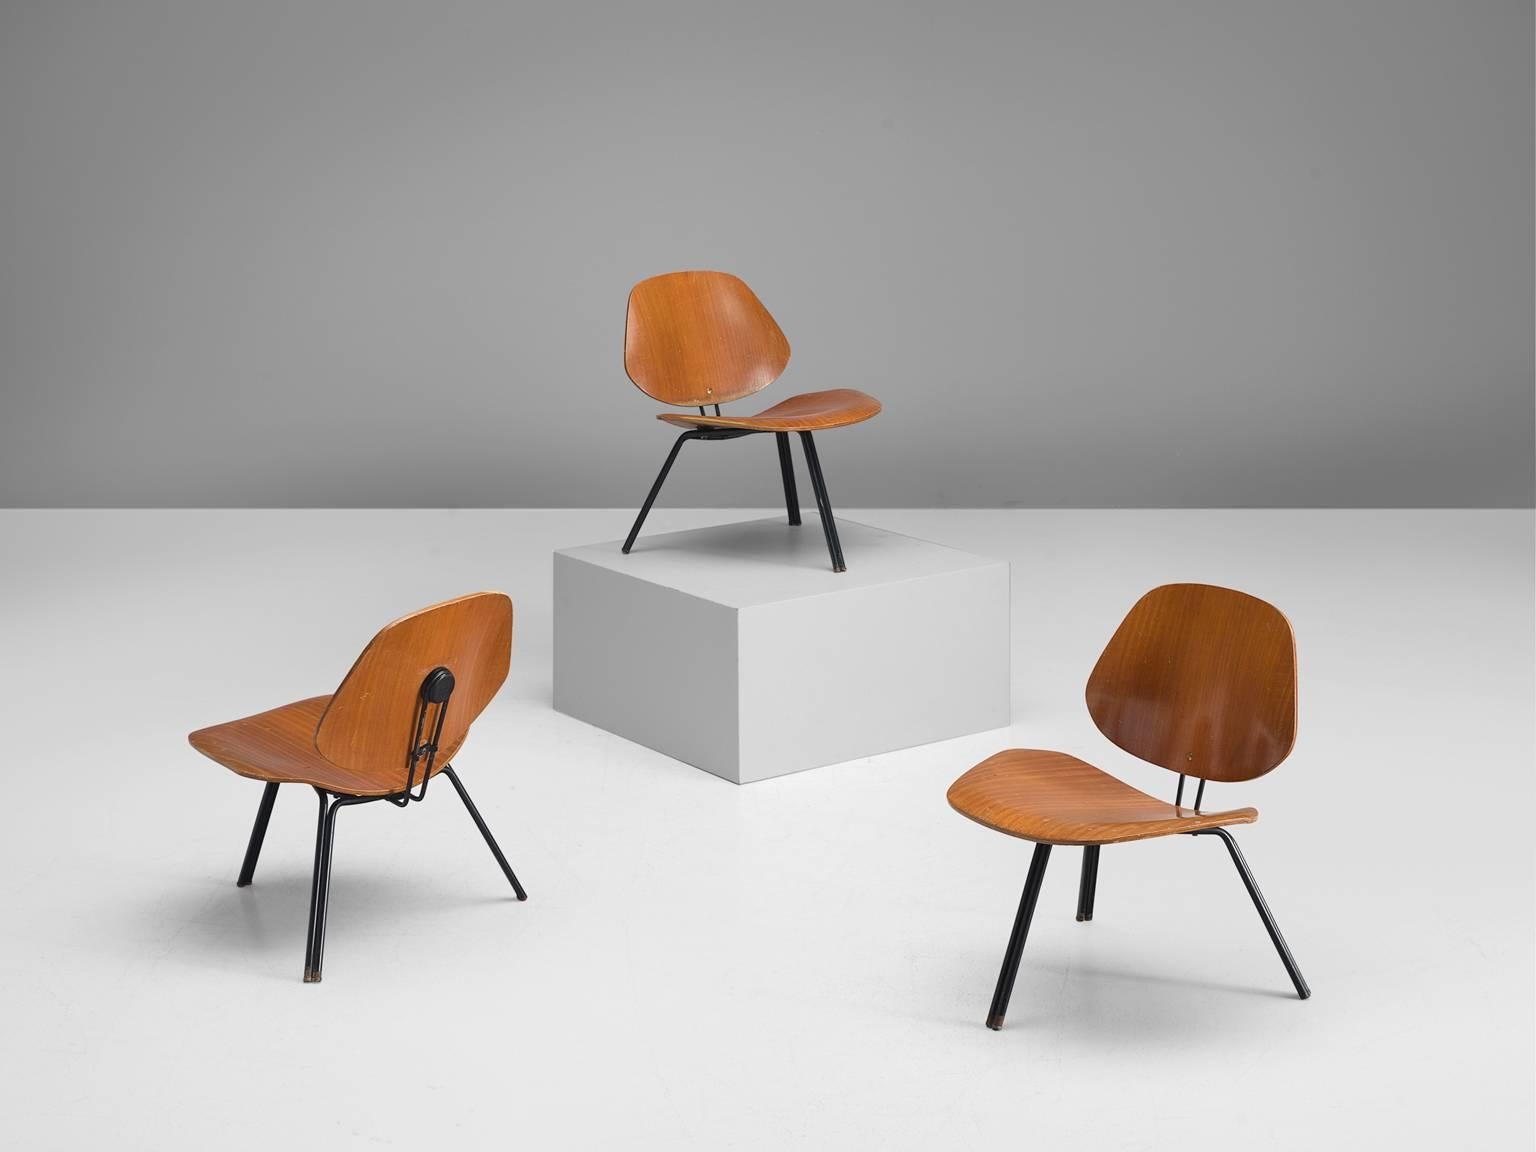 Three chairs 'P31', wood and metal by Osvaldo Borsani for Tecno, Italy, 1957

This set of three P31 chairs are made by Osvaldo Borsani and produced by Tecno. The ant-legged tripod chairs have thin metal black legs with seat and back that, apart